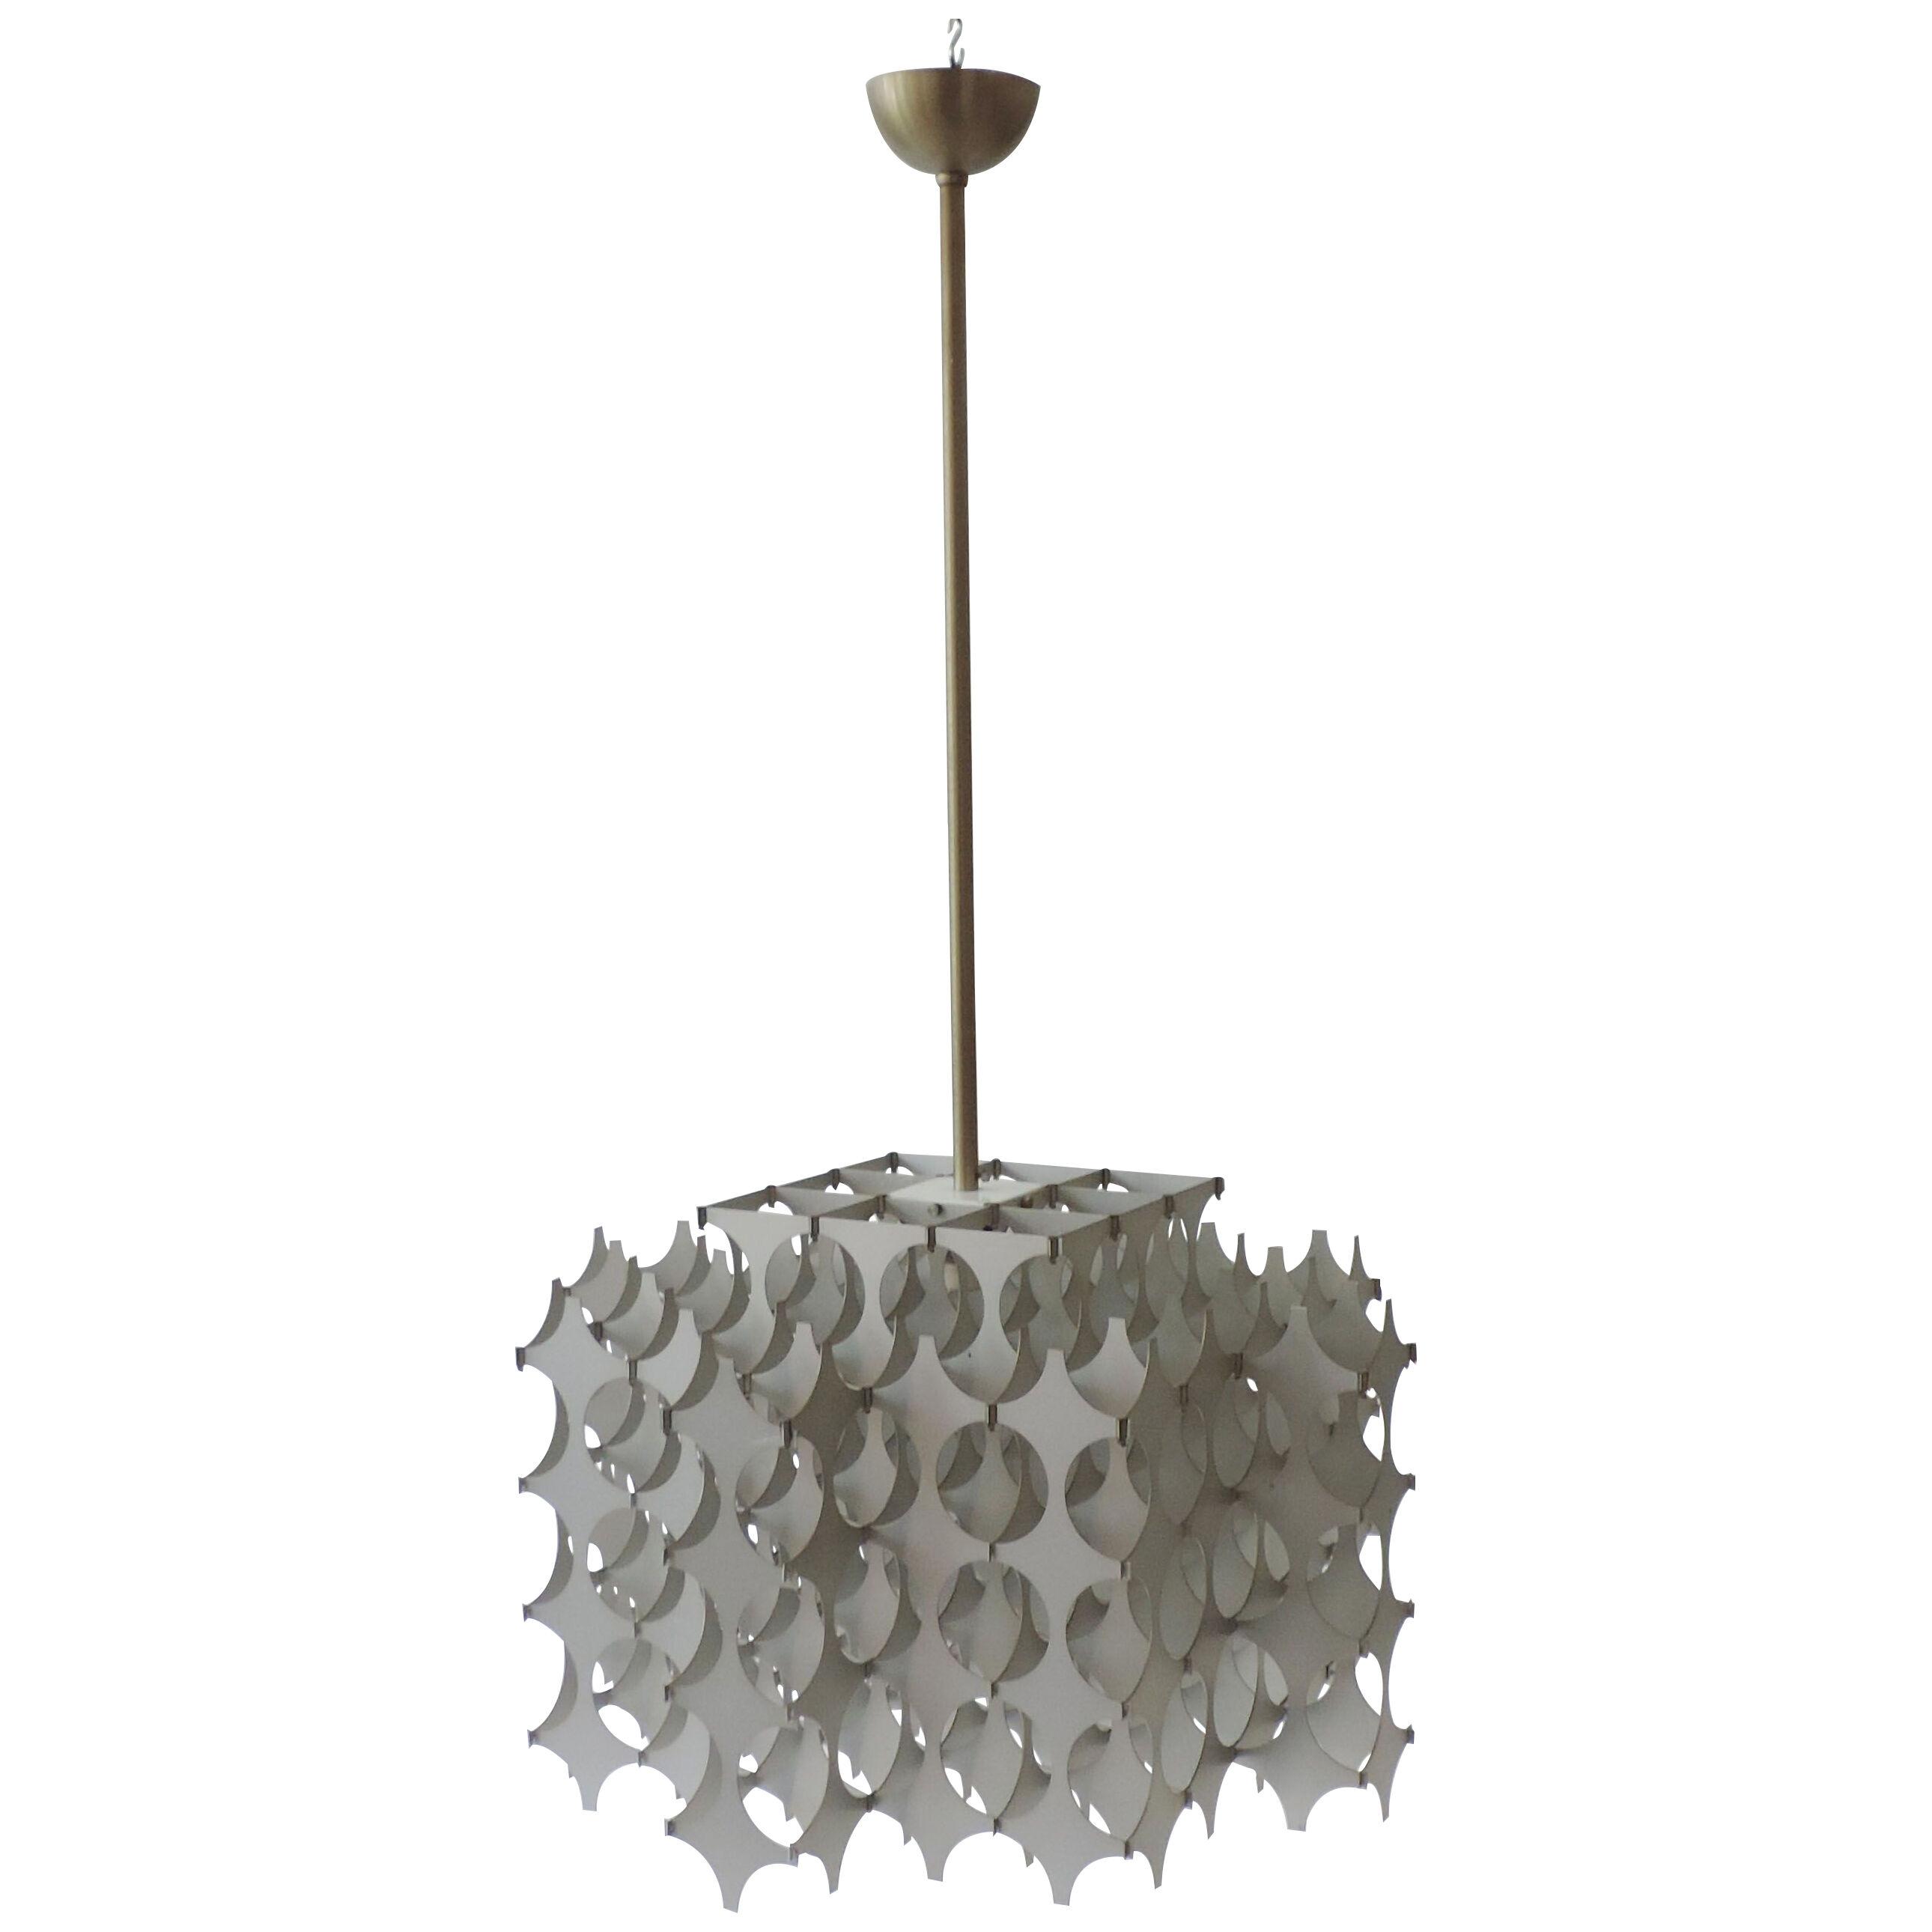 Mario Marenco Kinetic Ceiling Lamp Mod. Cynthia for Artemide, Italy, 1968